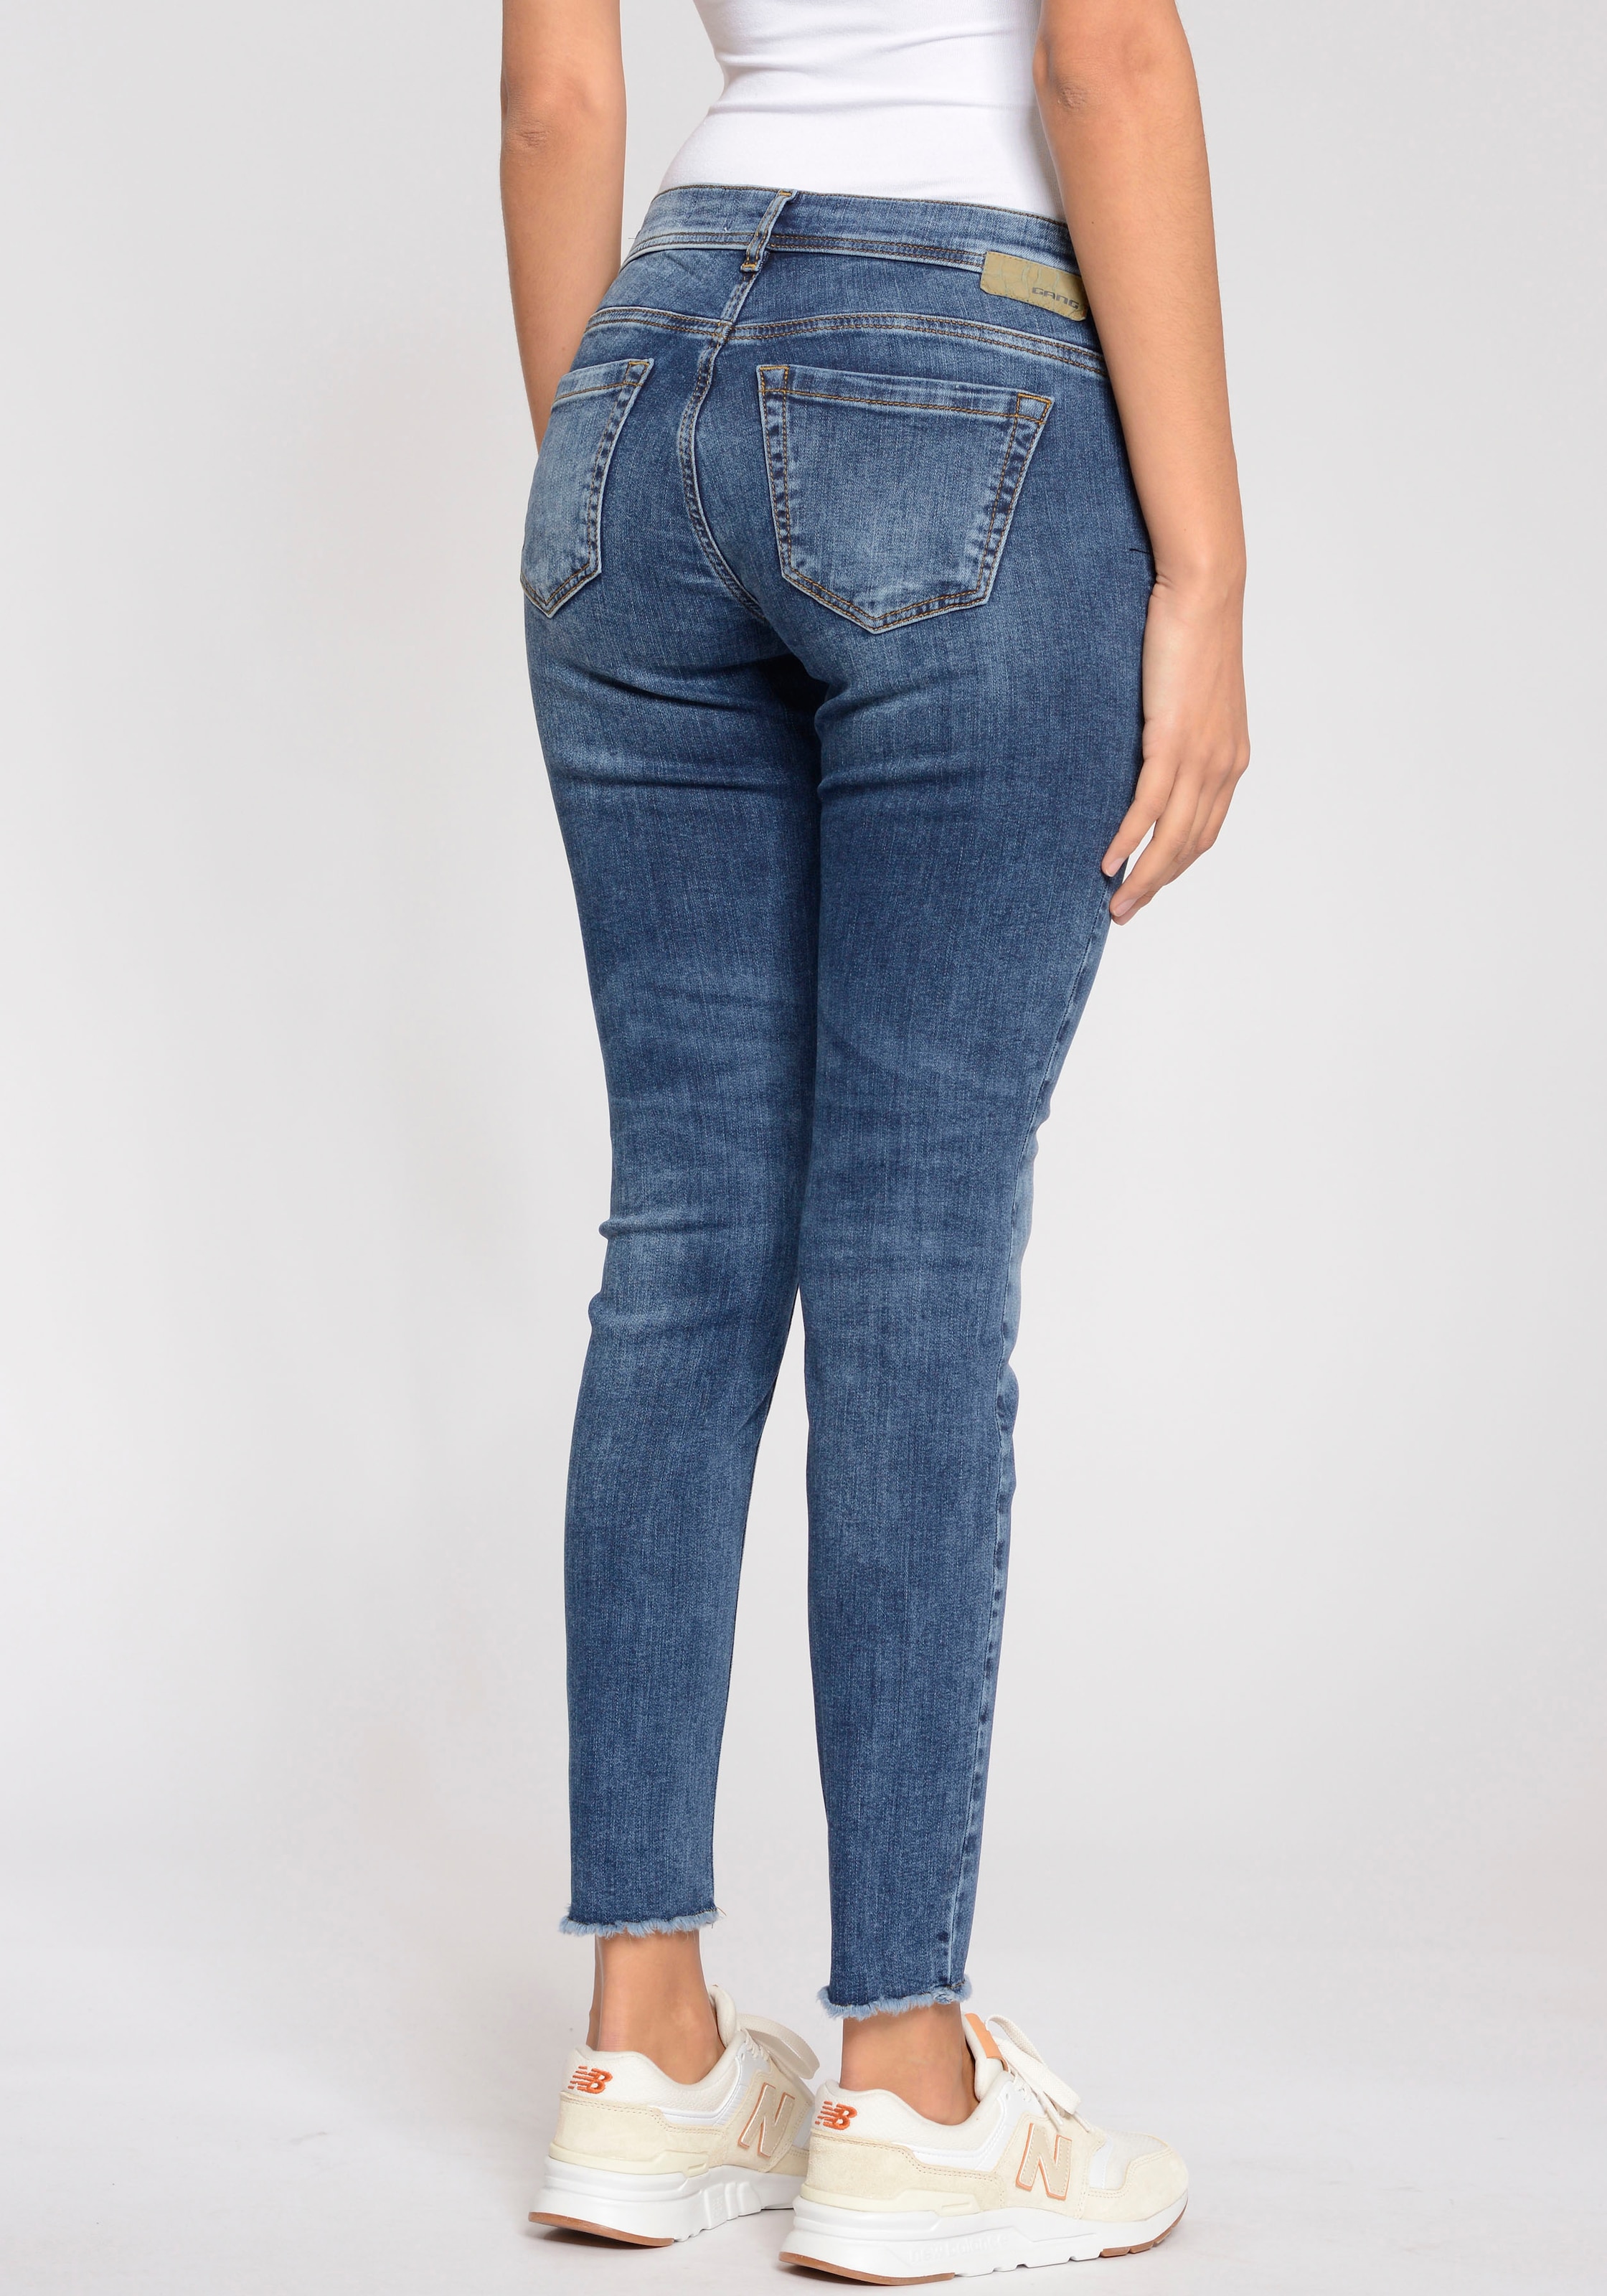 ♕ »94 GANG Skinny-fit-Jeans Faye bei Cropped«